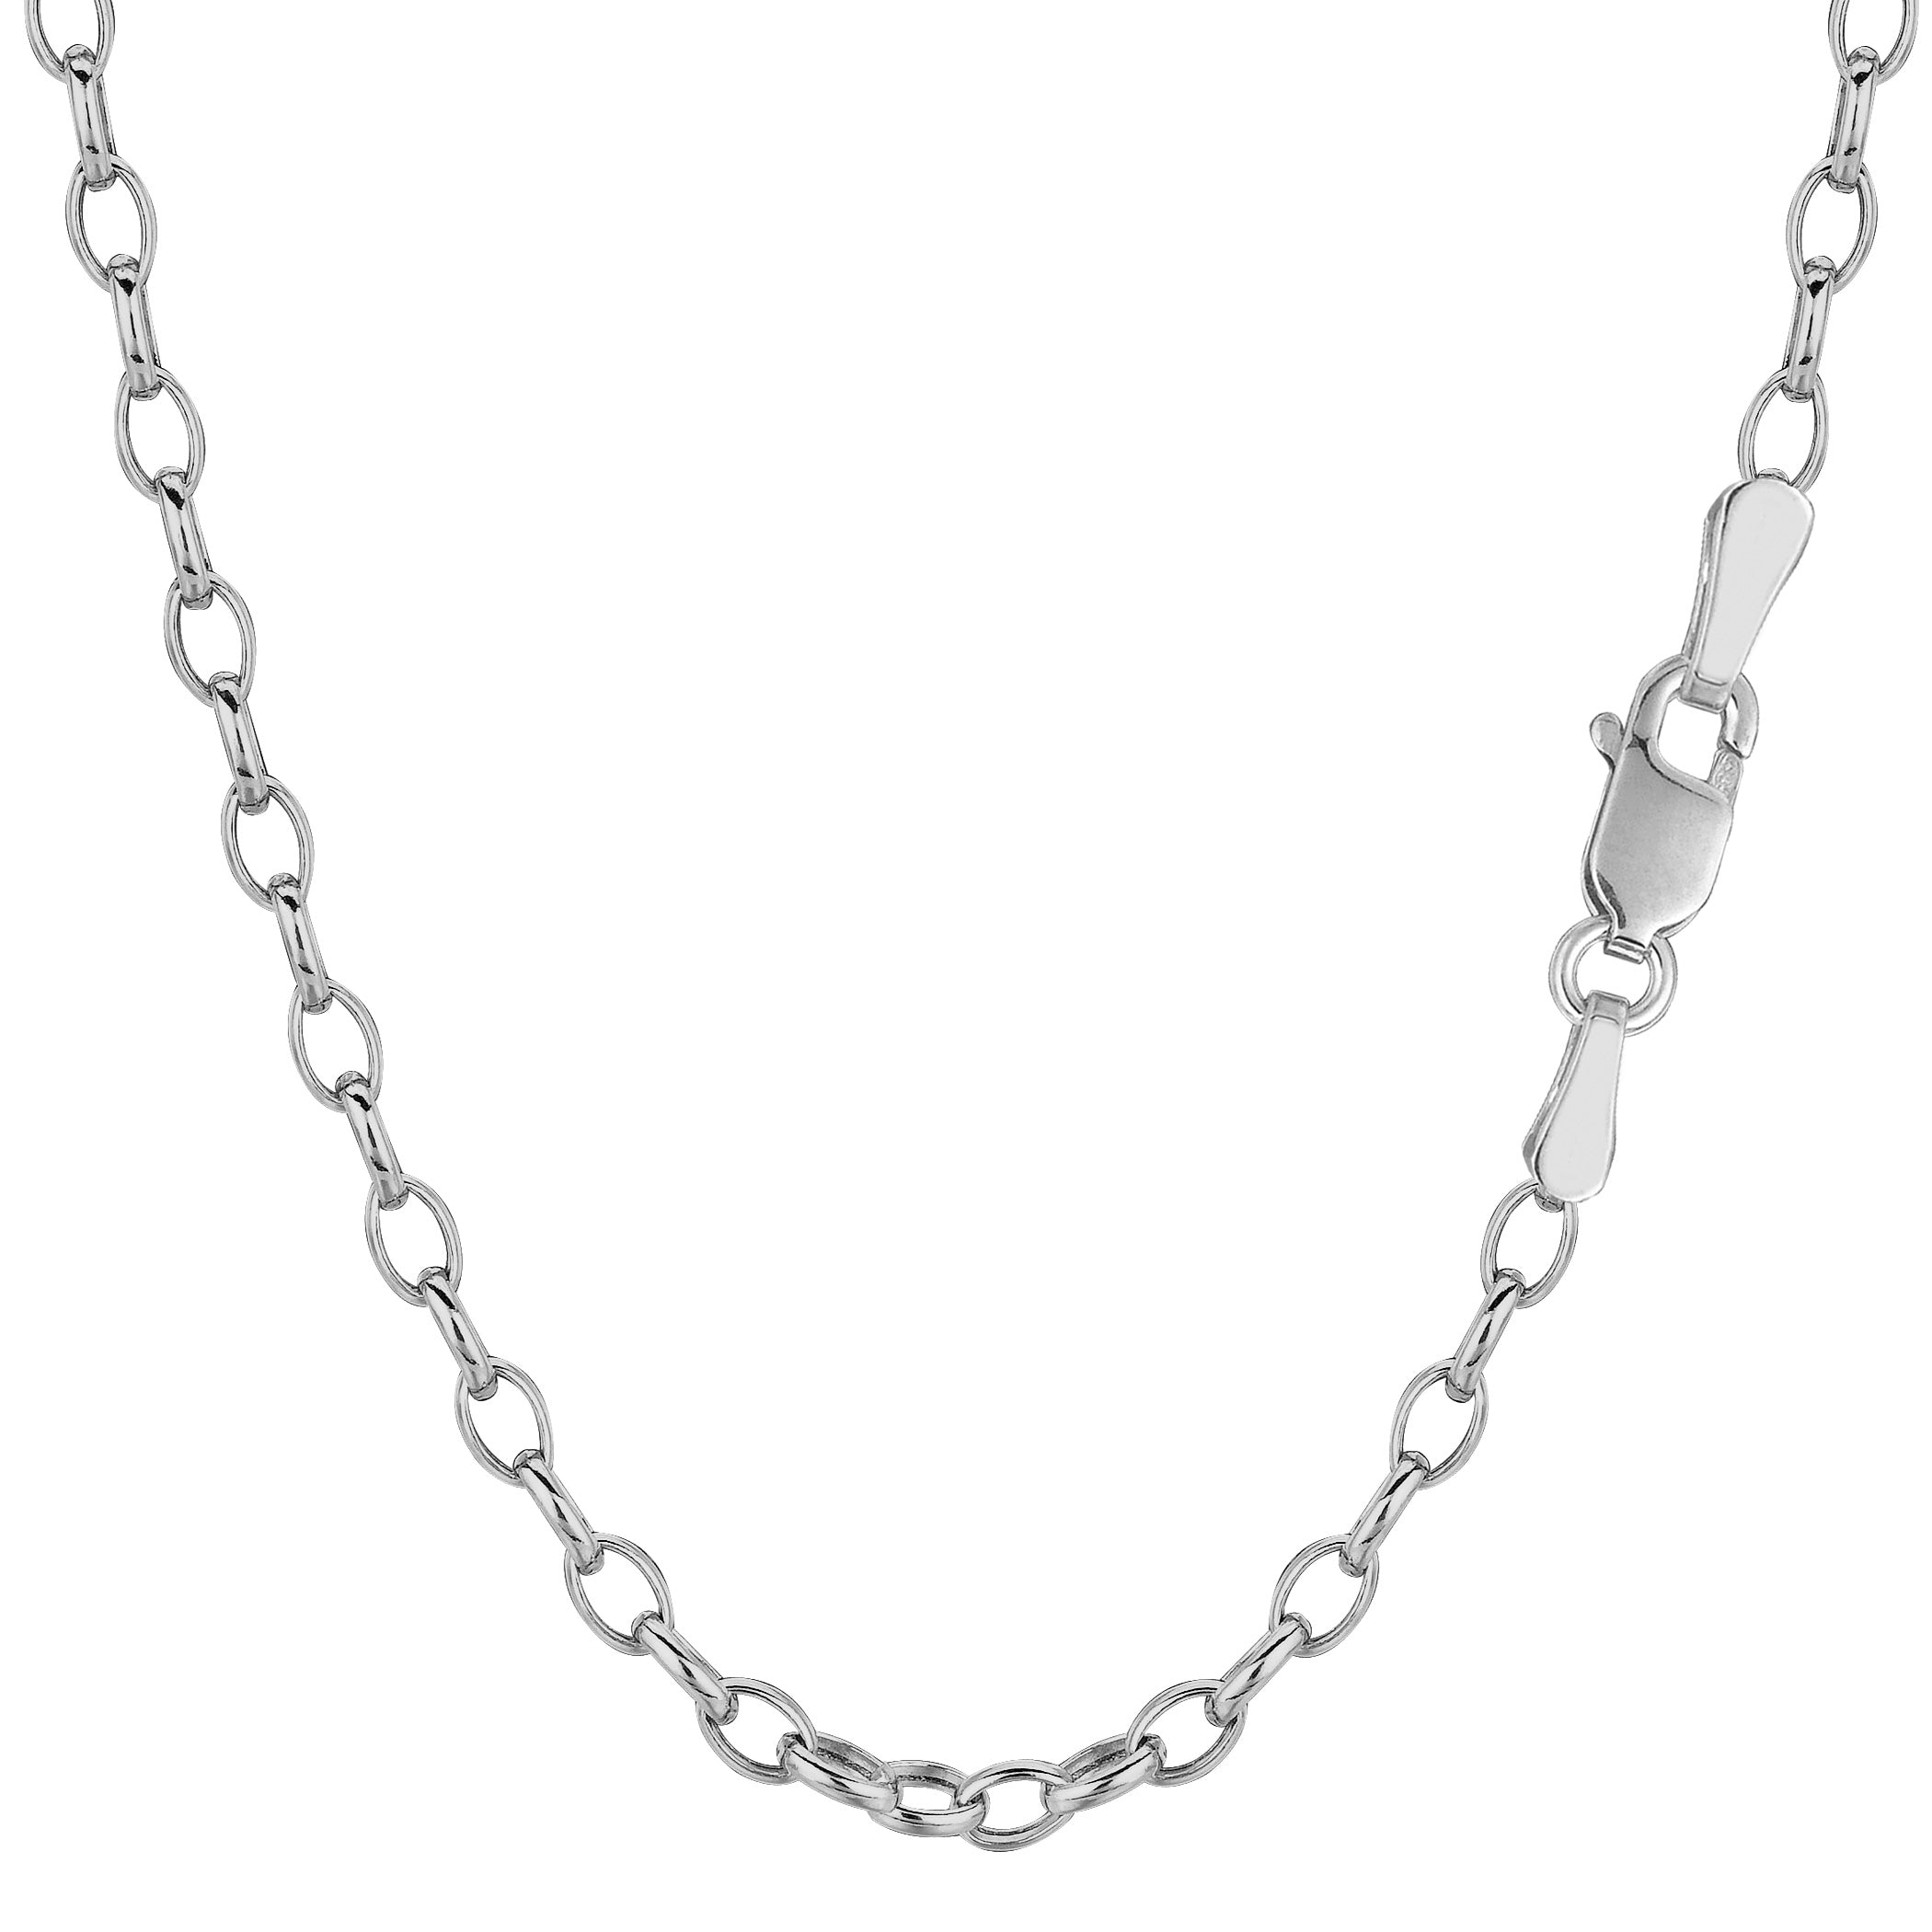 14k White Gold Oval Rolo Link Chain Necklace, 3.2mm, 18" fine designer jewelry for men and women